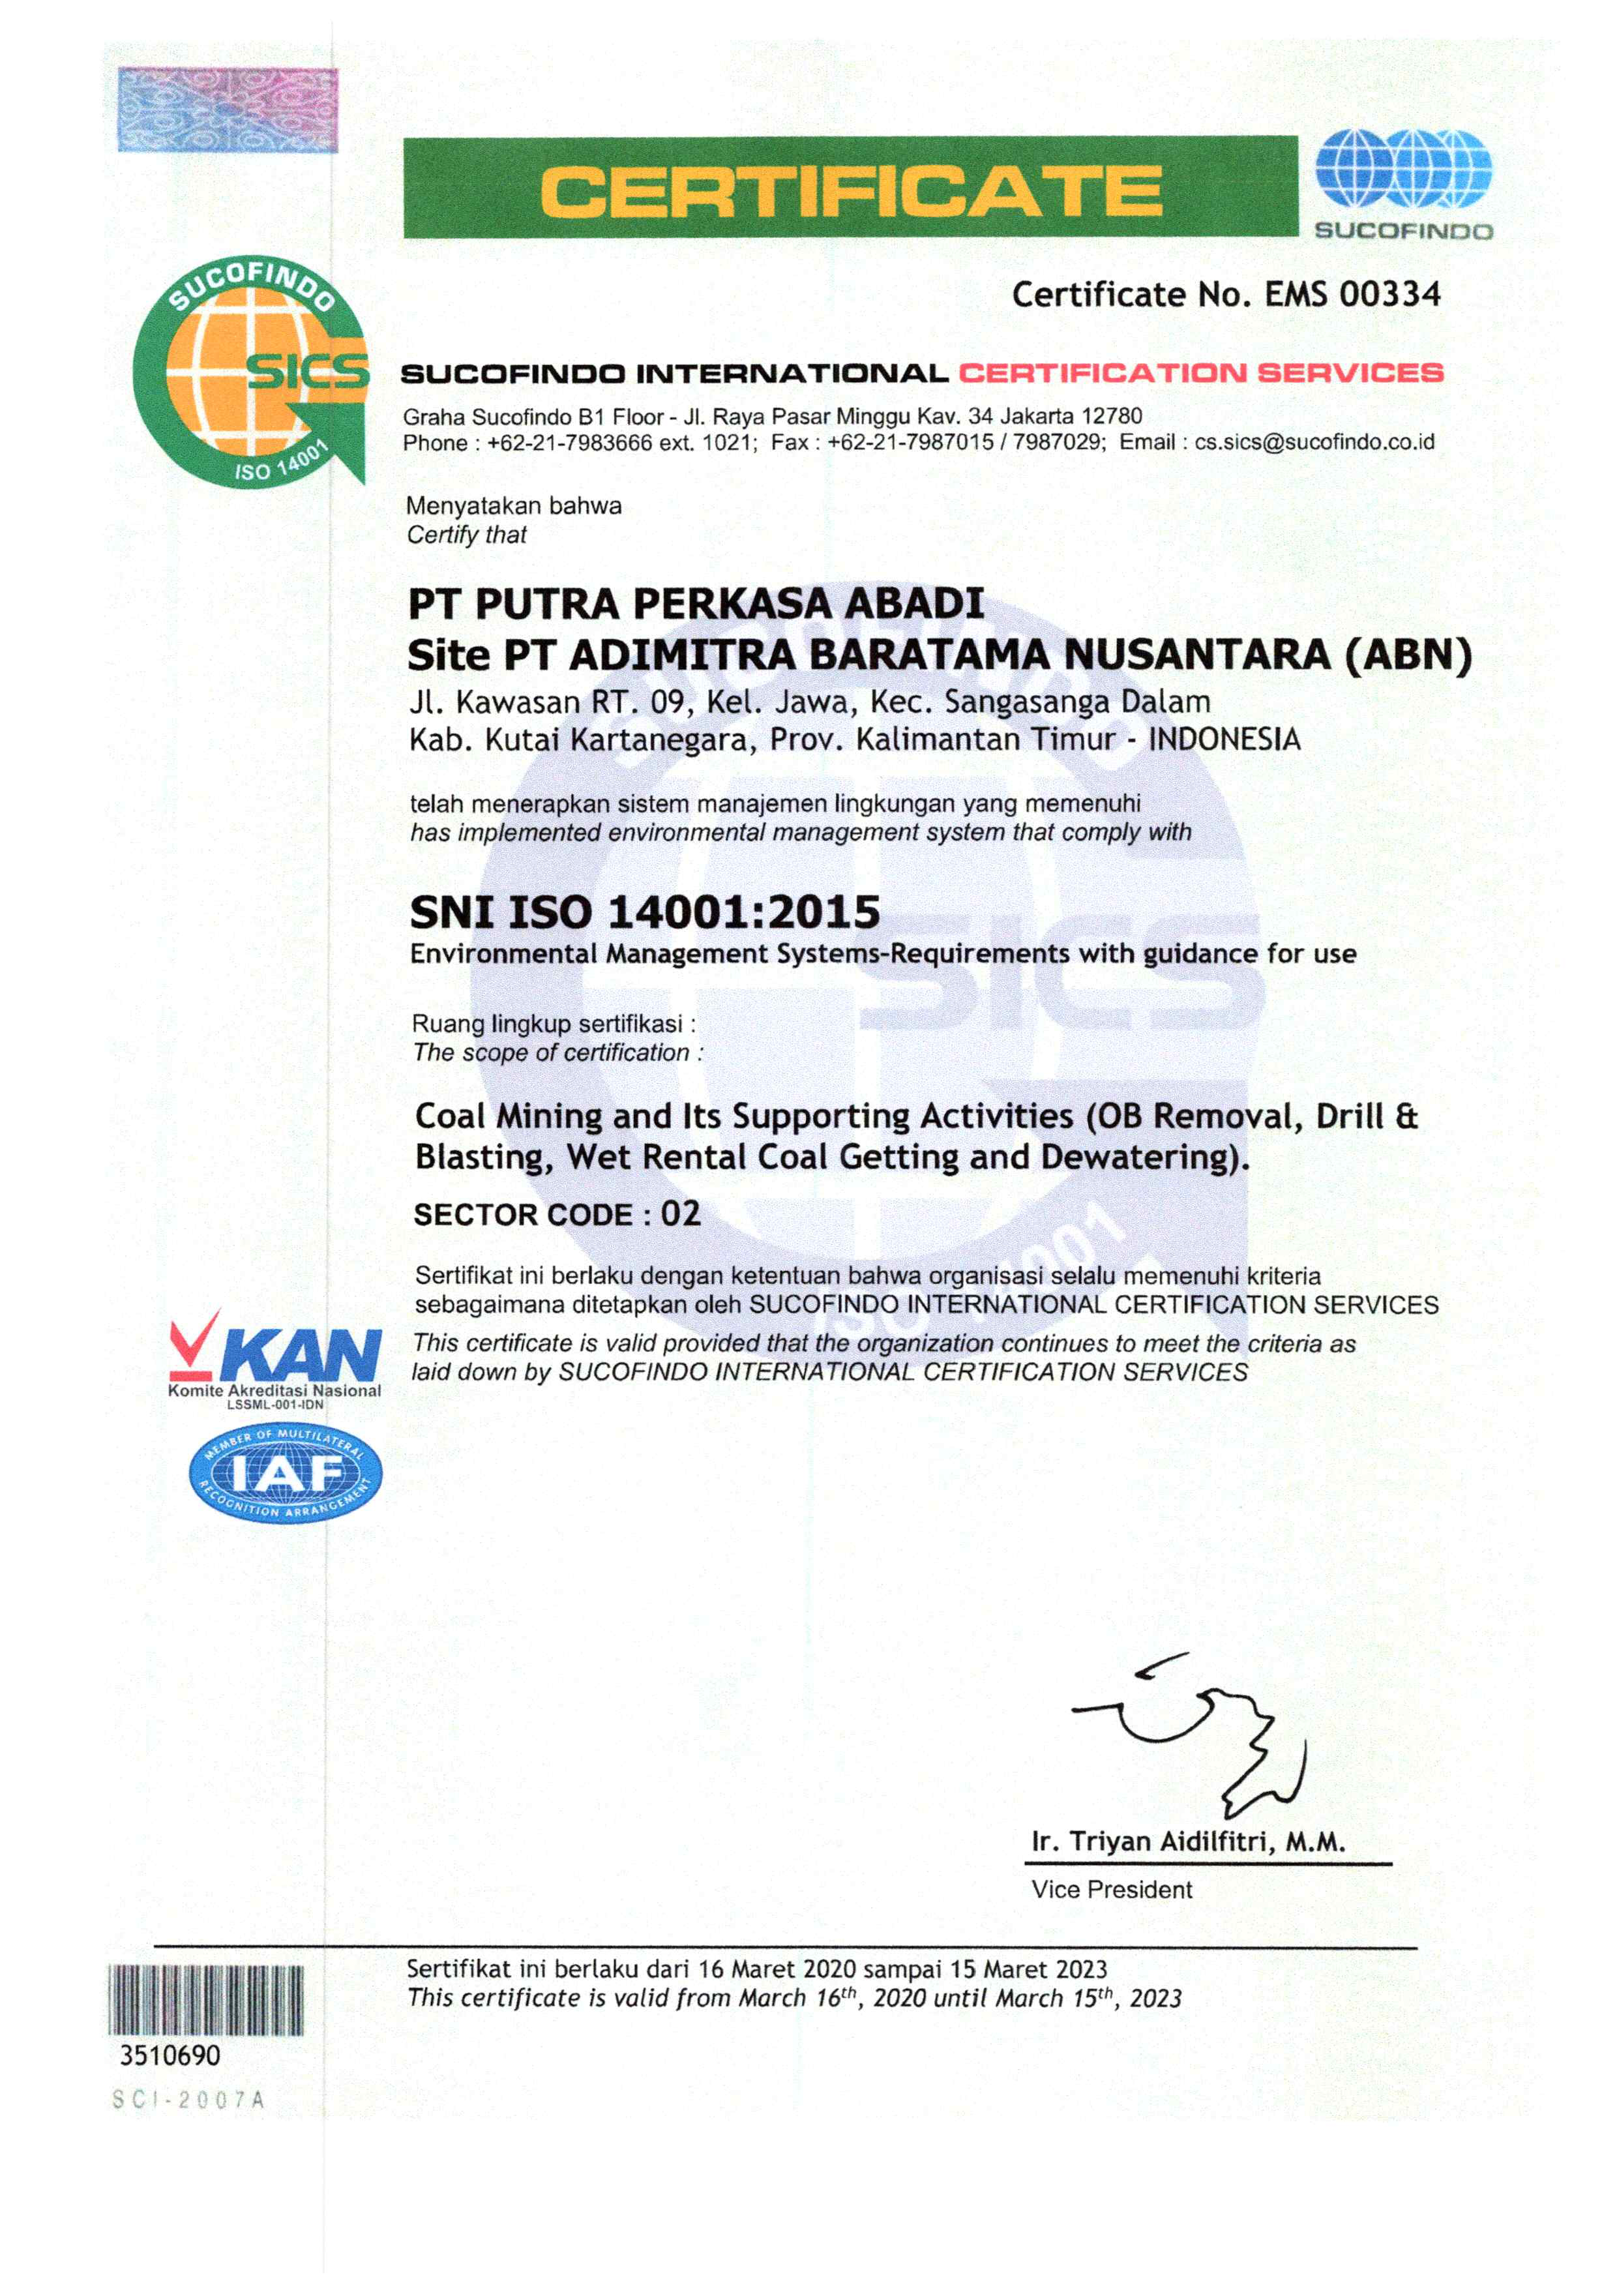 Sertifikat ISO 14001 PPA ABN_2020_Page_2